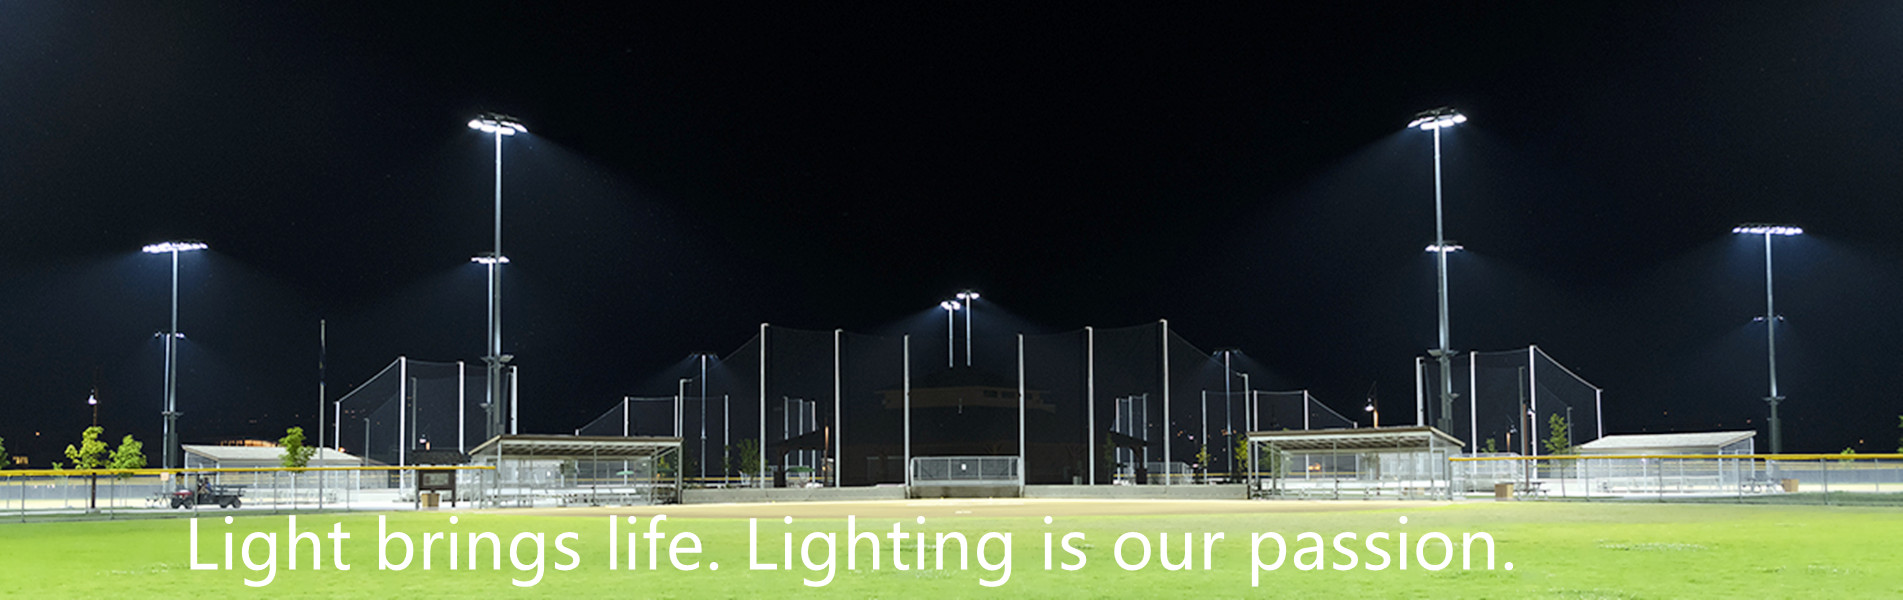 Sports lighting projects